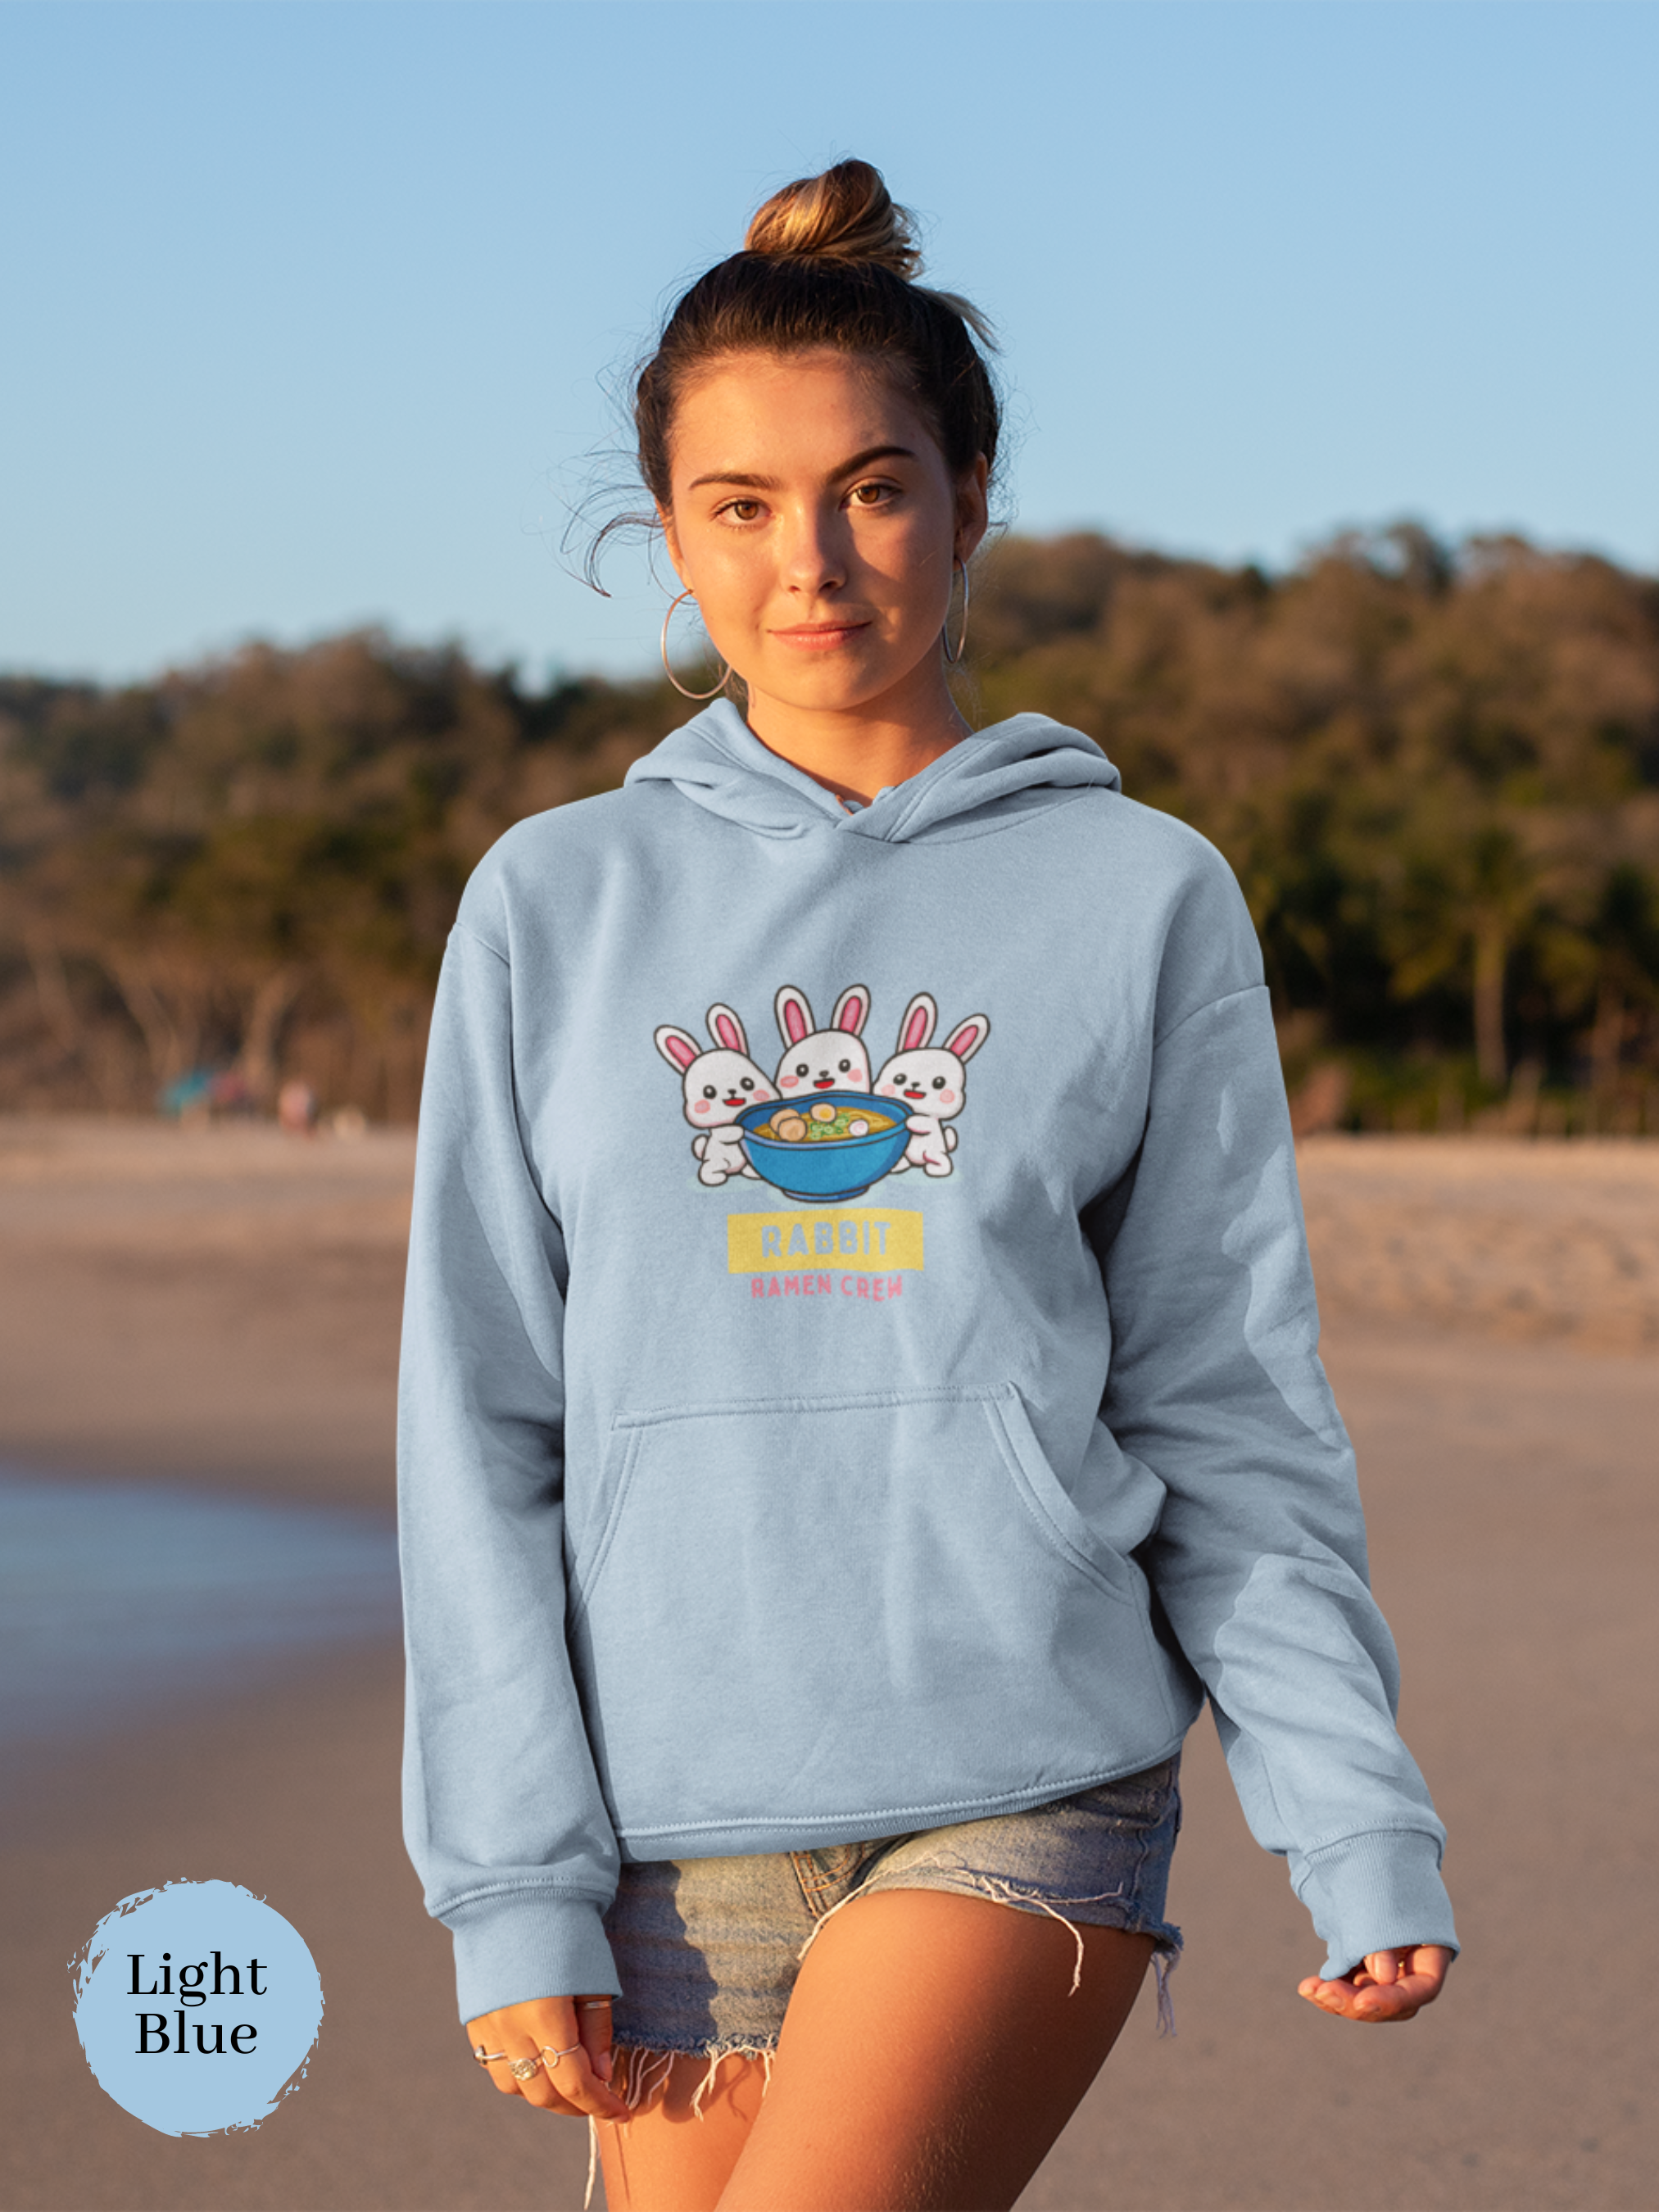 Ramen Hoodie: Rabbit Ramen Crew with Adorable Ramen Art - Perfect for Foodie and Asian Food Lovers